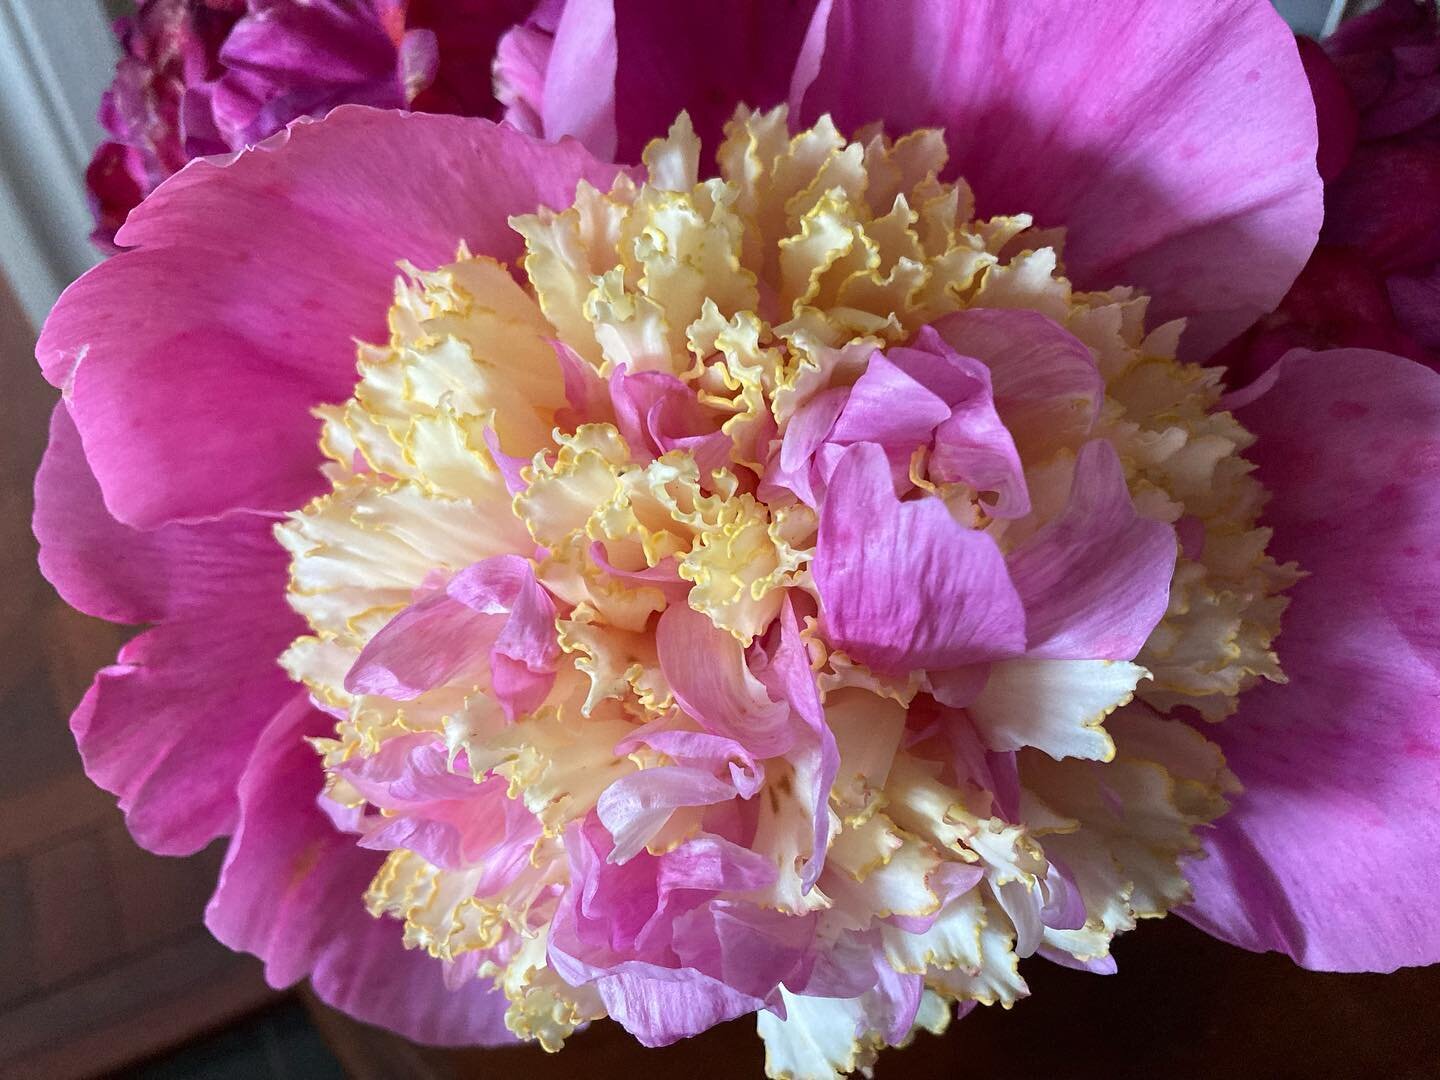 Every year I am amazed by this Peony appearing. I think it&rsquo;s nature at its best. #peonyrose